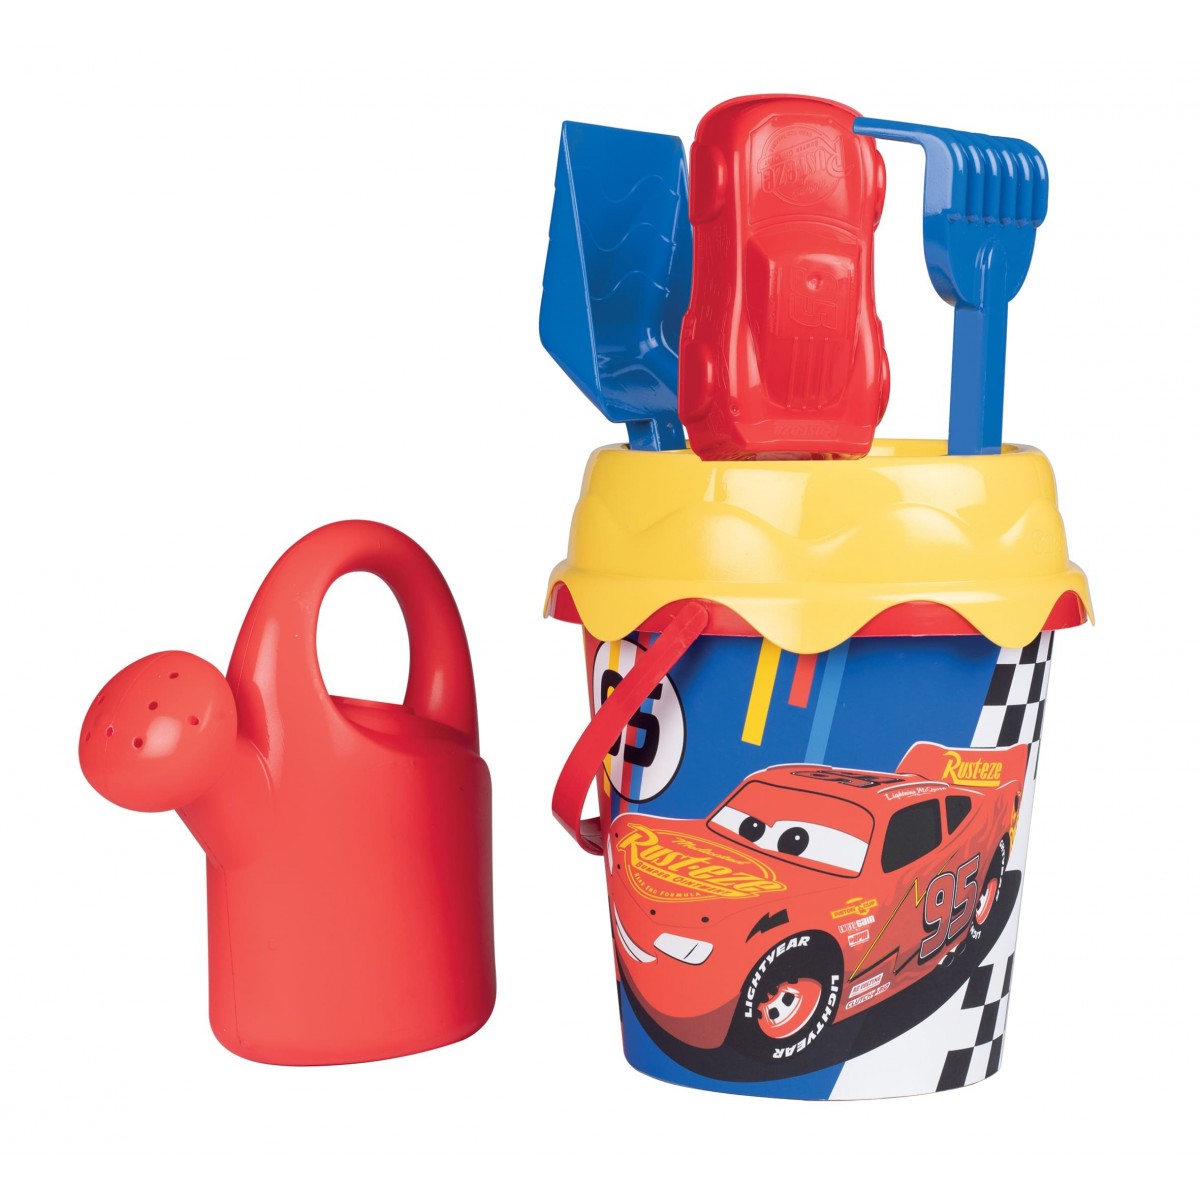 Doudou Cars Mac Queen voiture rouge Nicotoy, Simba Toys (Dickie), Disney  Baby